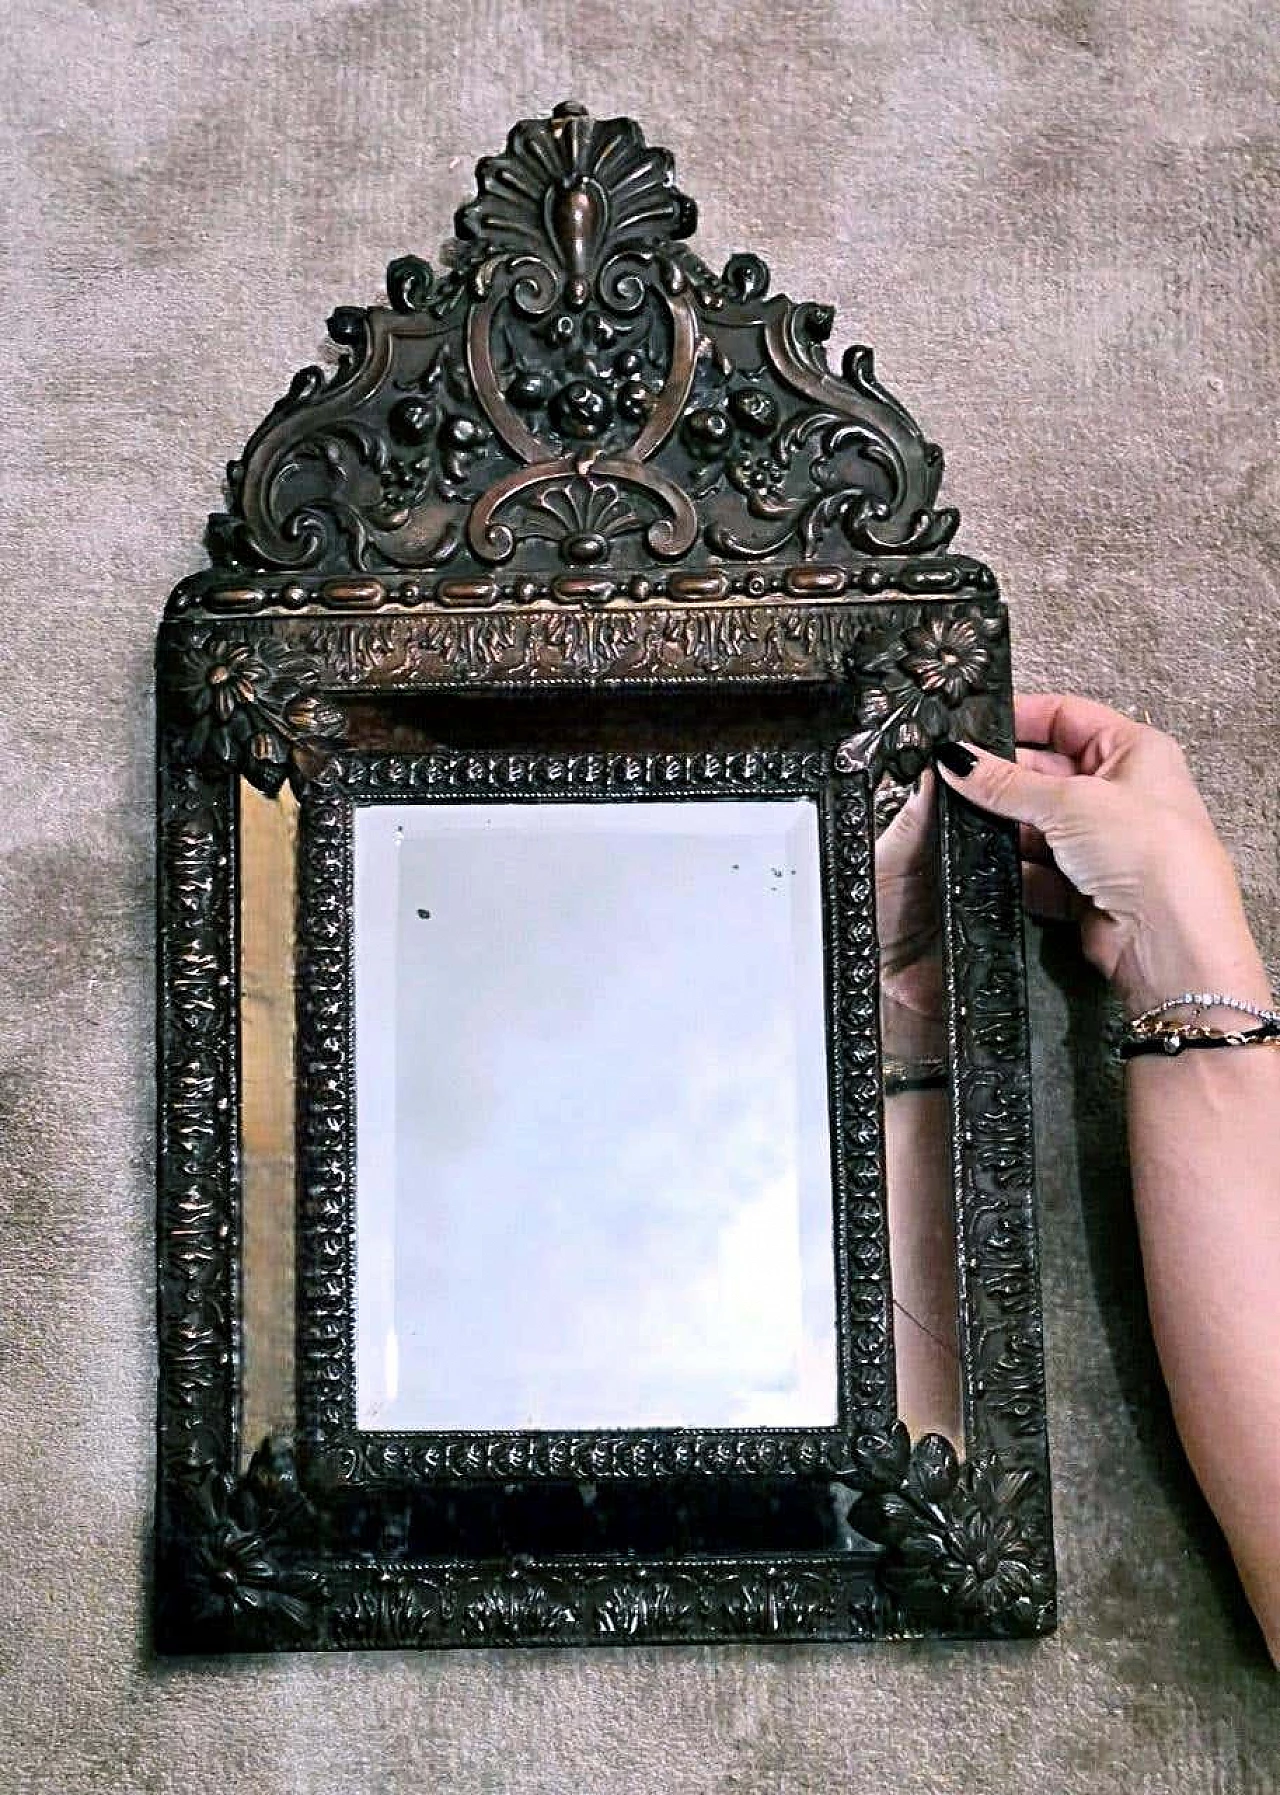 Napoleon III style wall mirror with repoussé work in burnished brass, mid-19th century 15